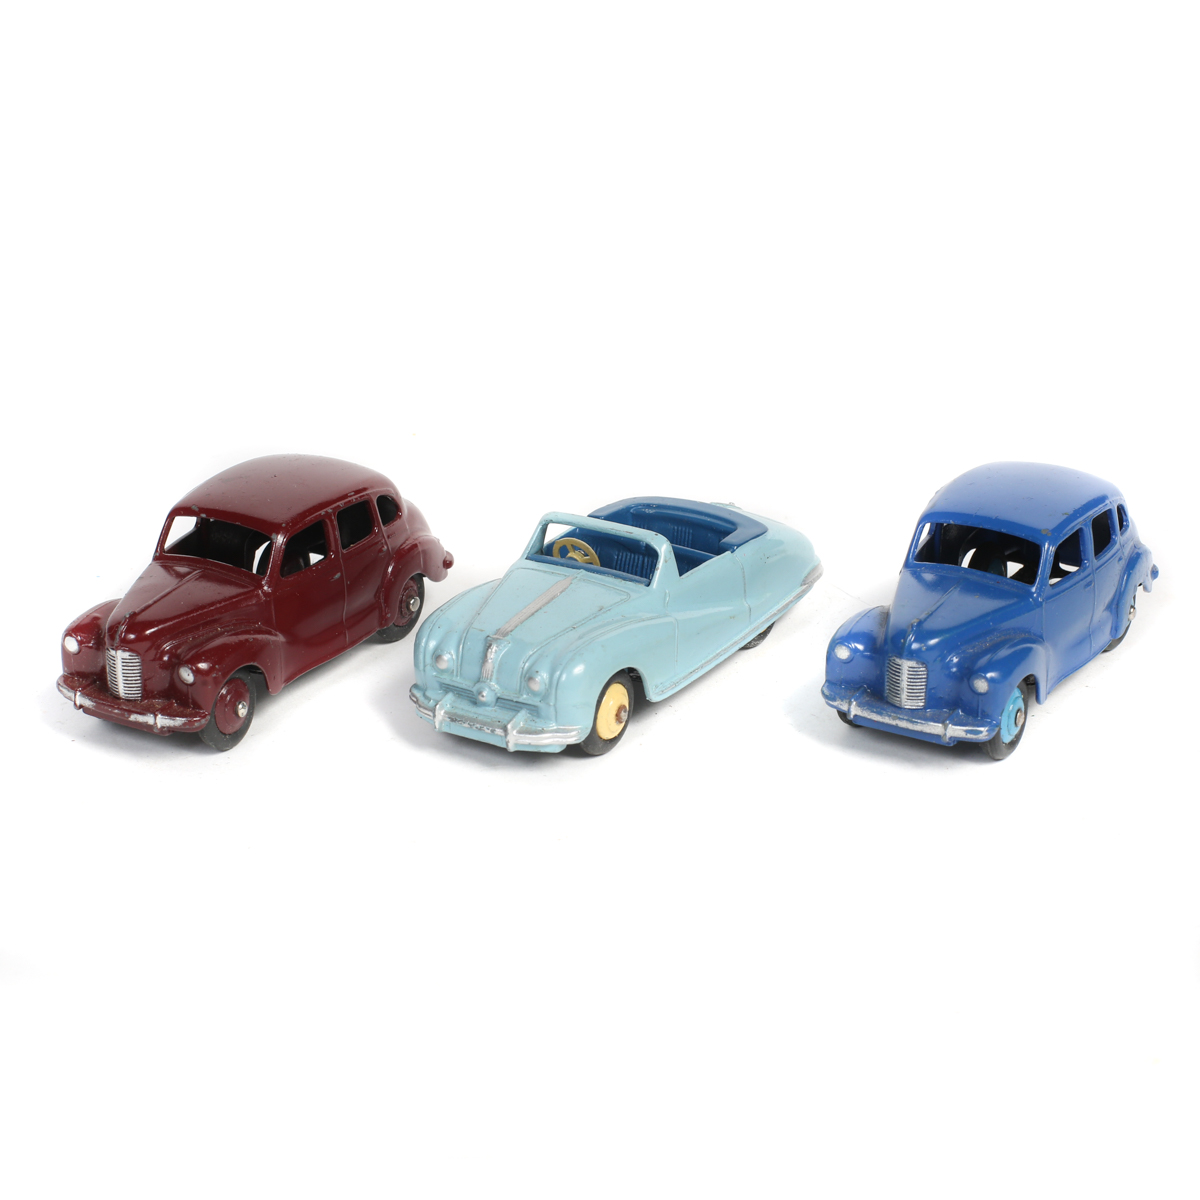 3 Dinky Toys Austin Cars. 2x Devon Saloons (40d/152) in dark blue with mid blue wheels and another